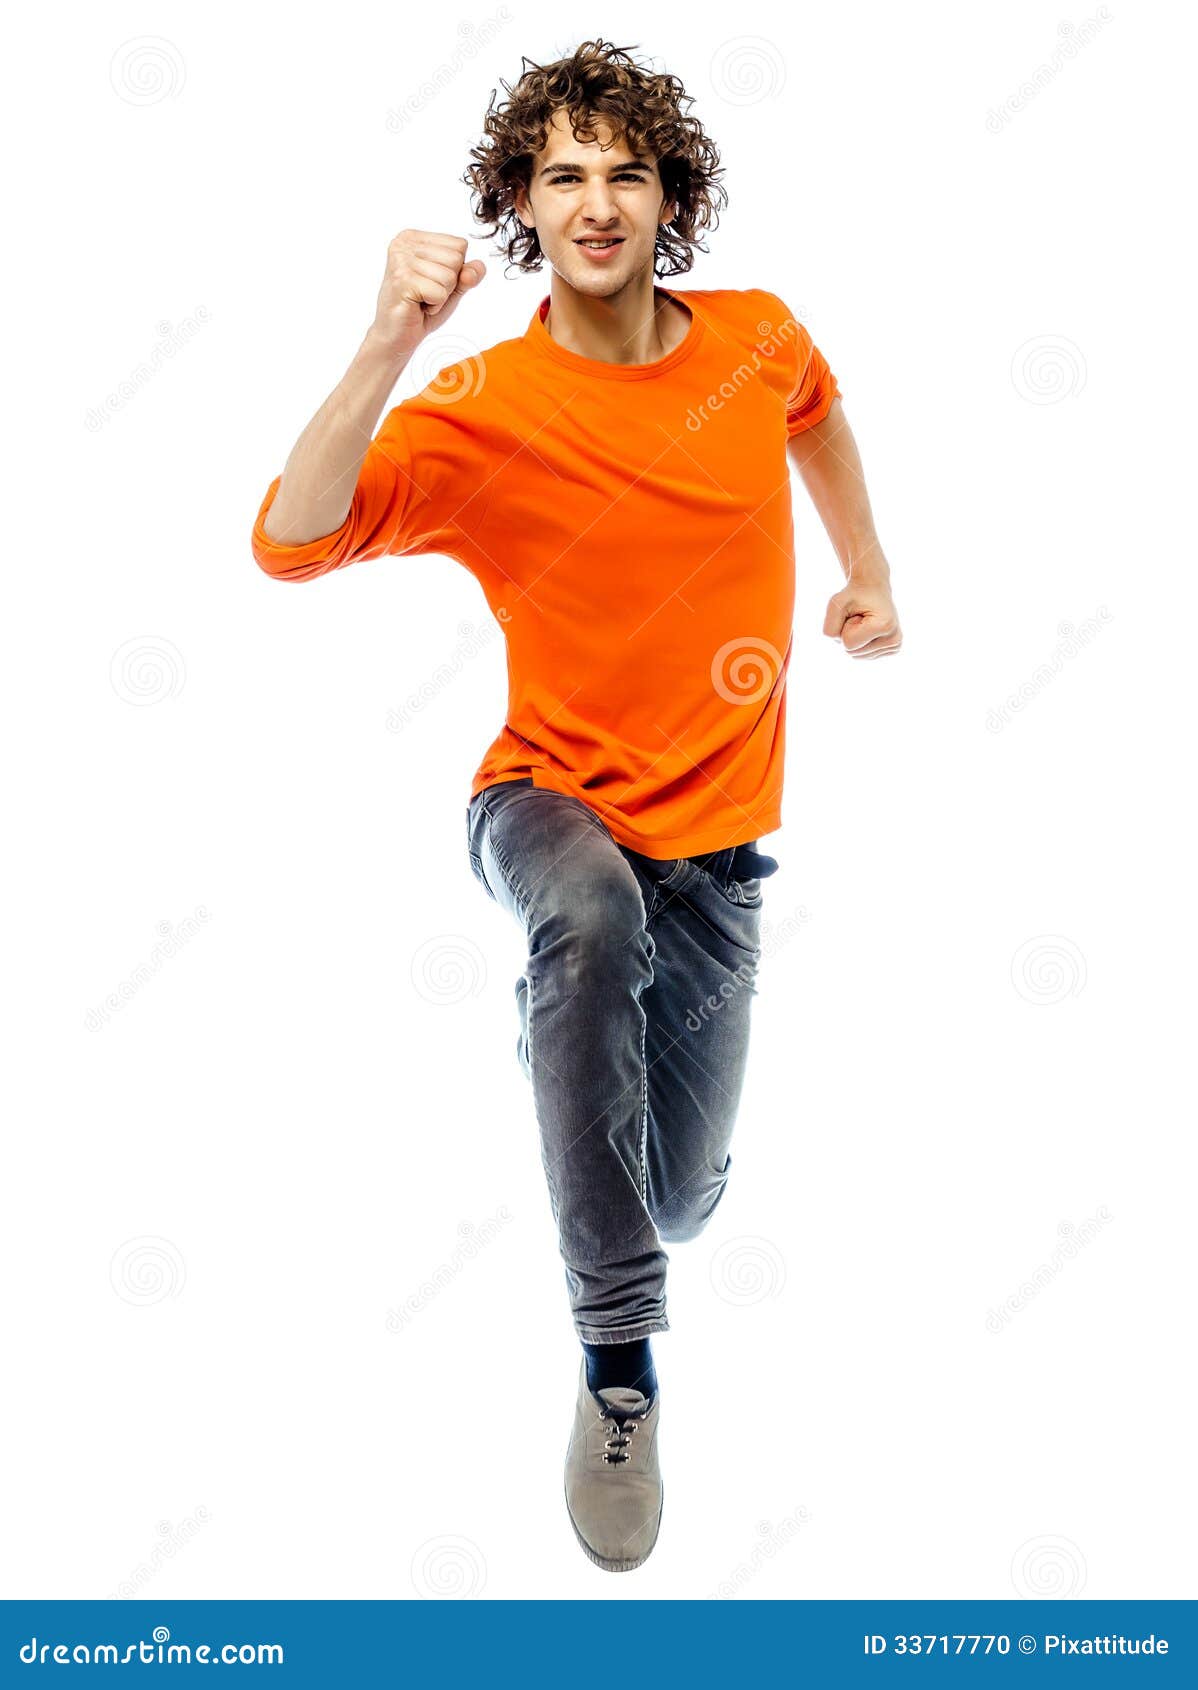 Young Man Running Front View Stock Photo - Image of full, hair: 33717770